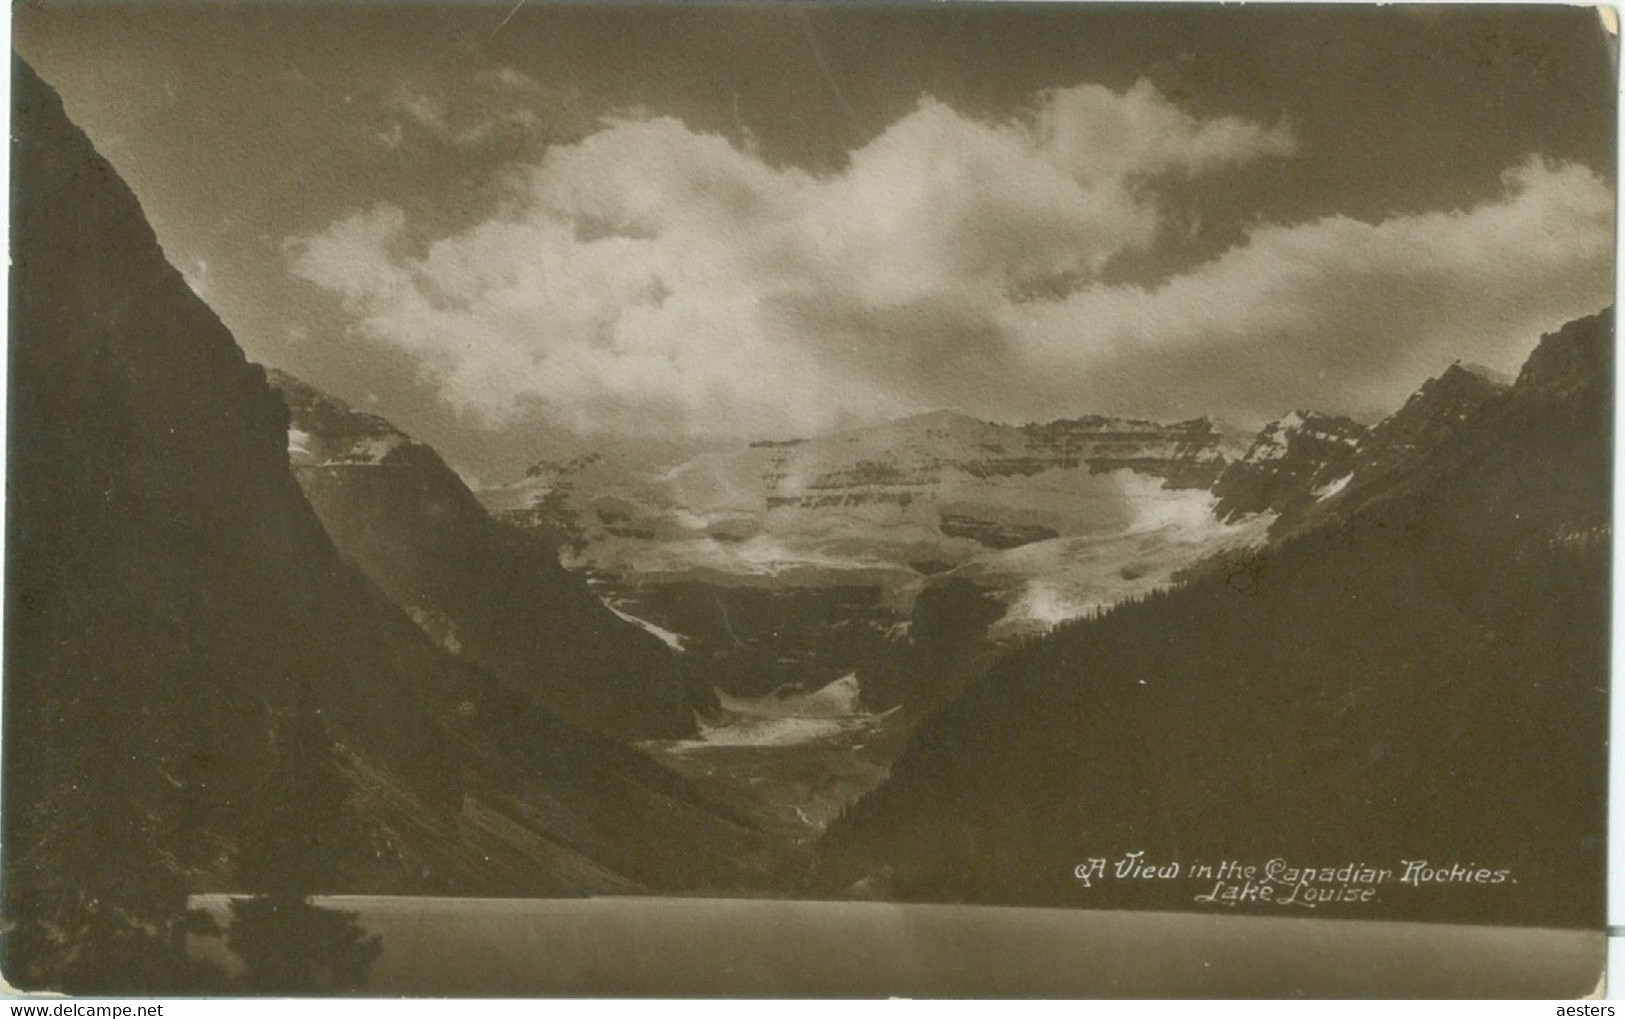 Lake Louise; View In The Canadian Rockies - Not Circulated. (Canada Fine Art Co. - Toronto) - Lake Louise